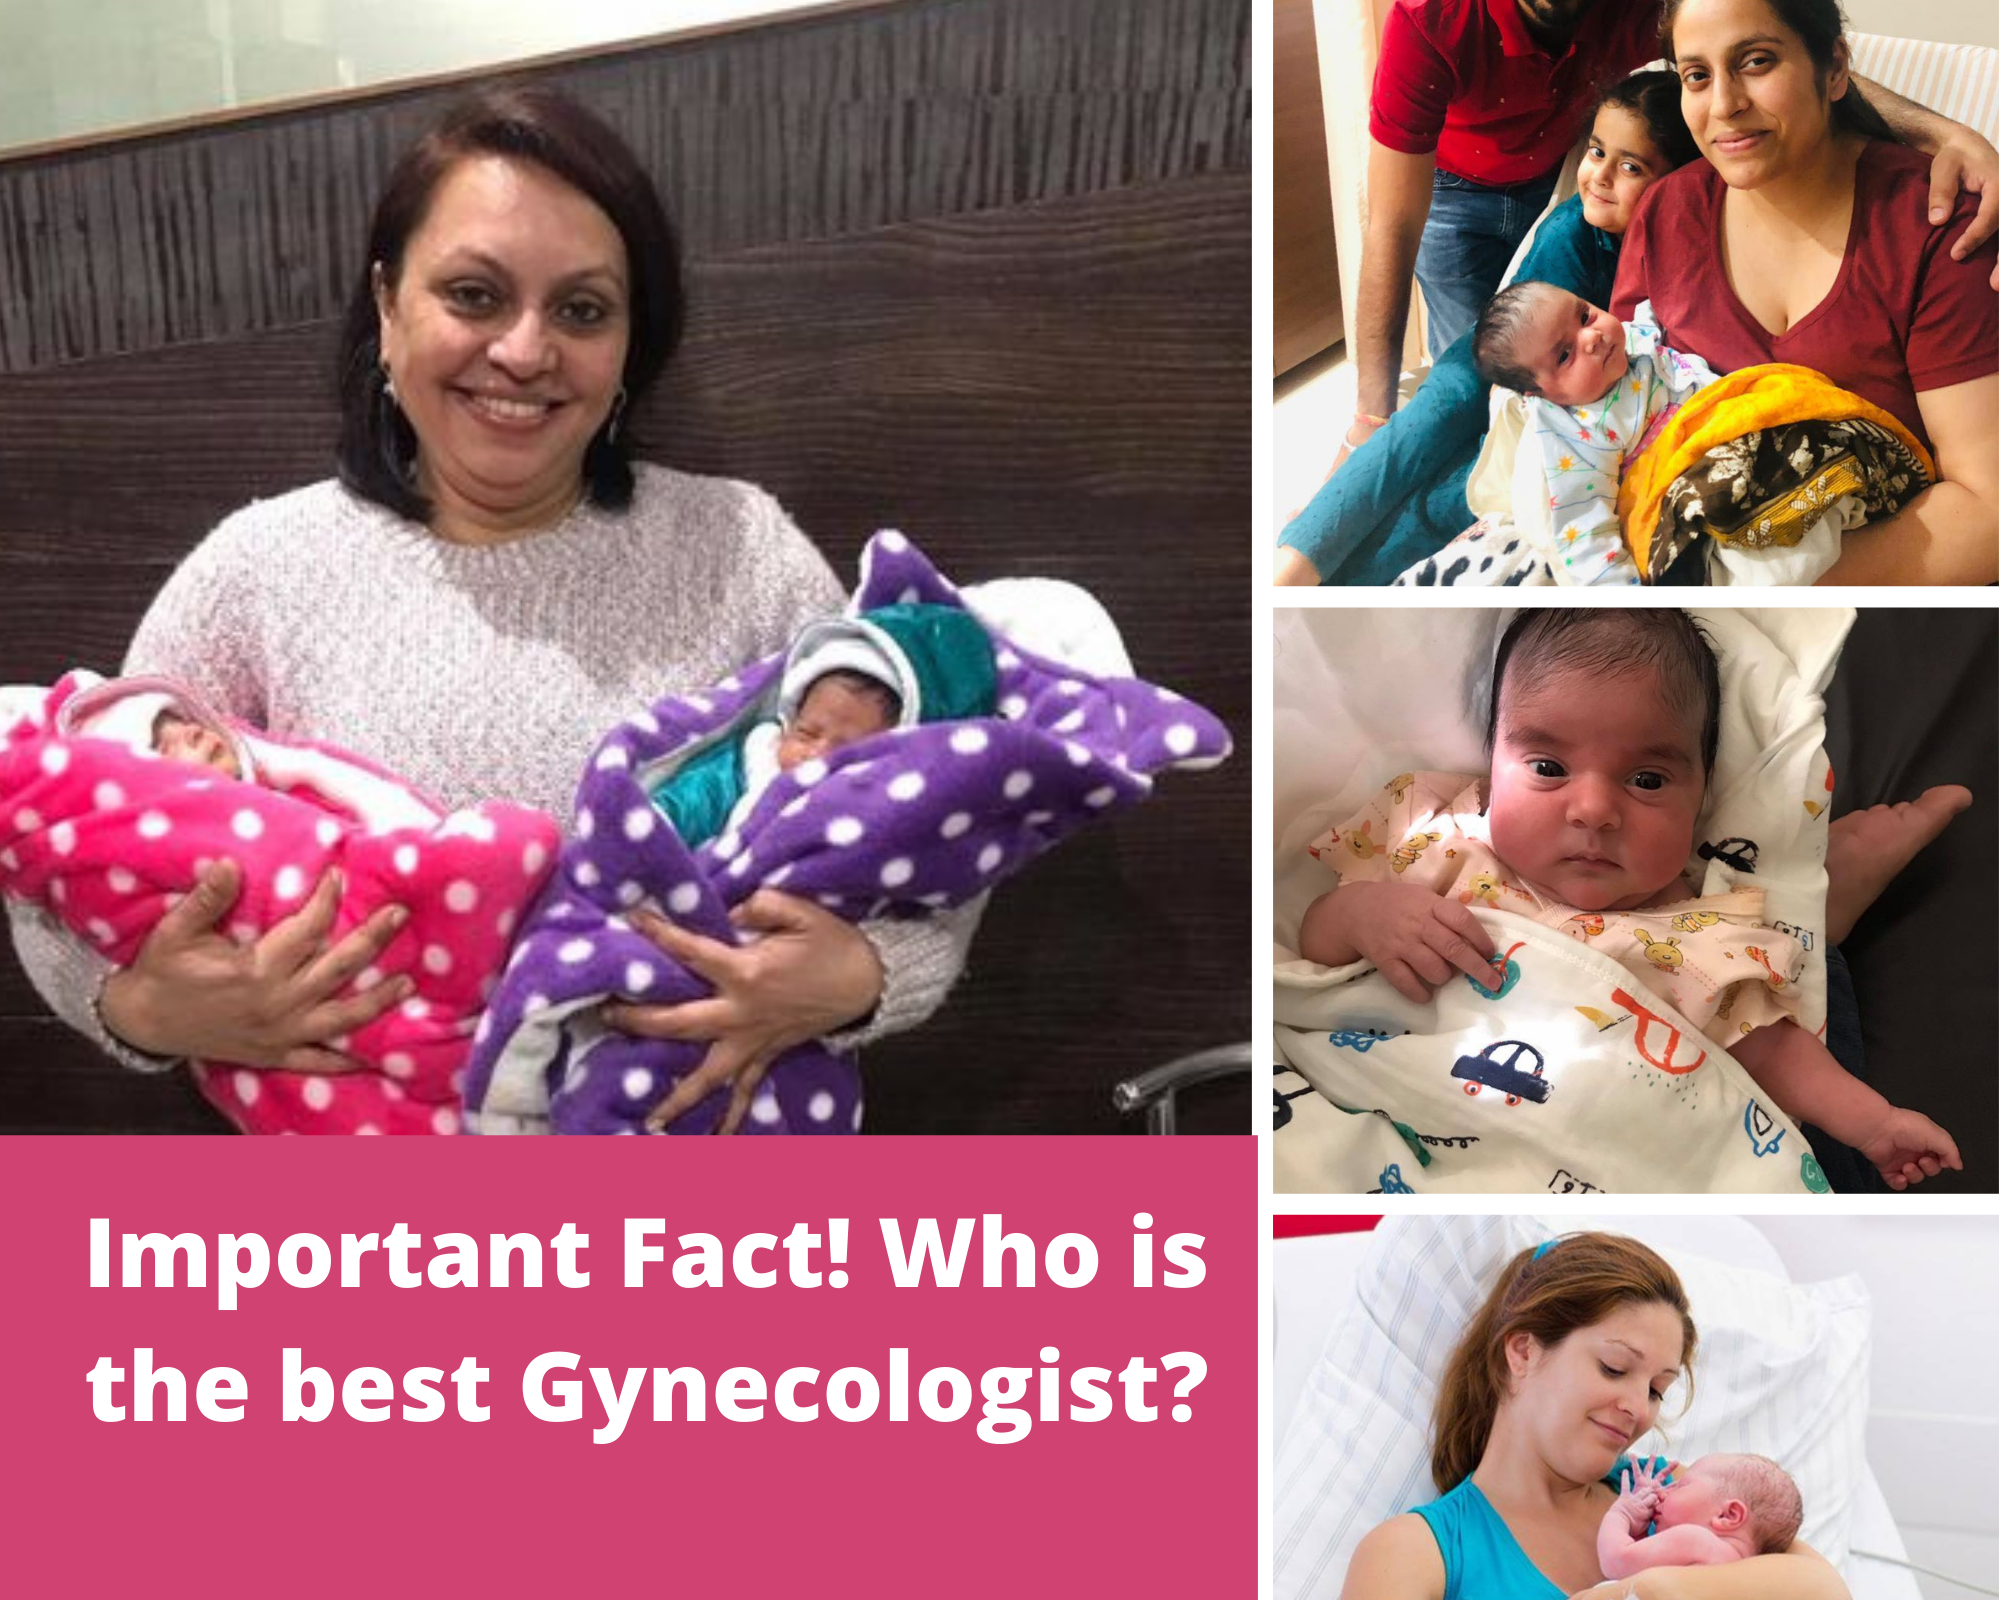 Important Fact! Who is the best Gynecologist?